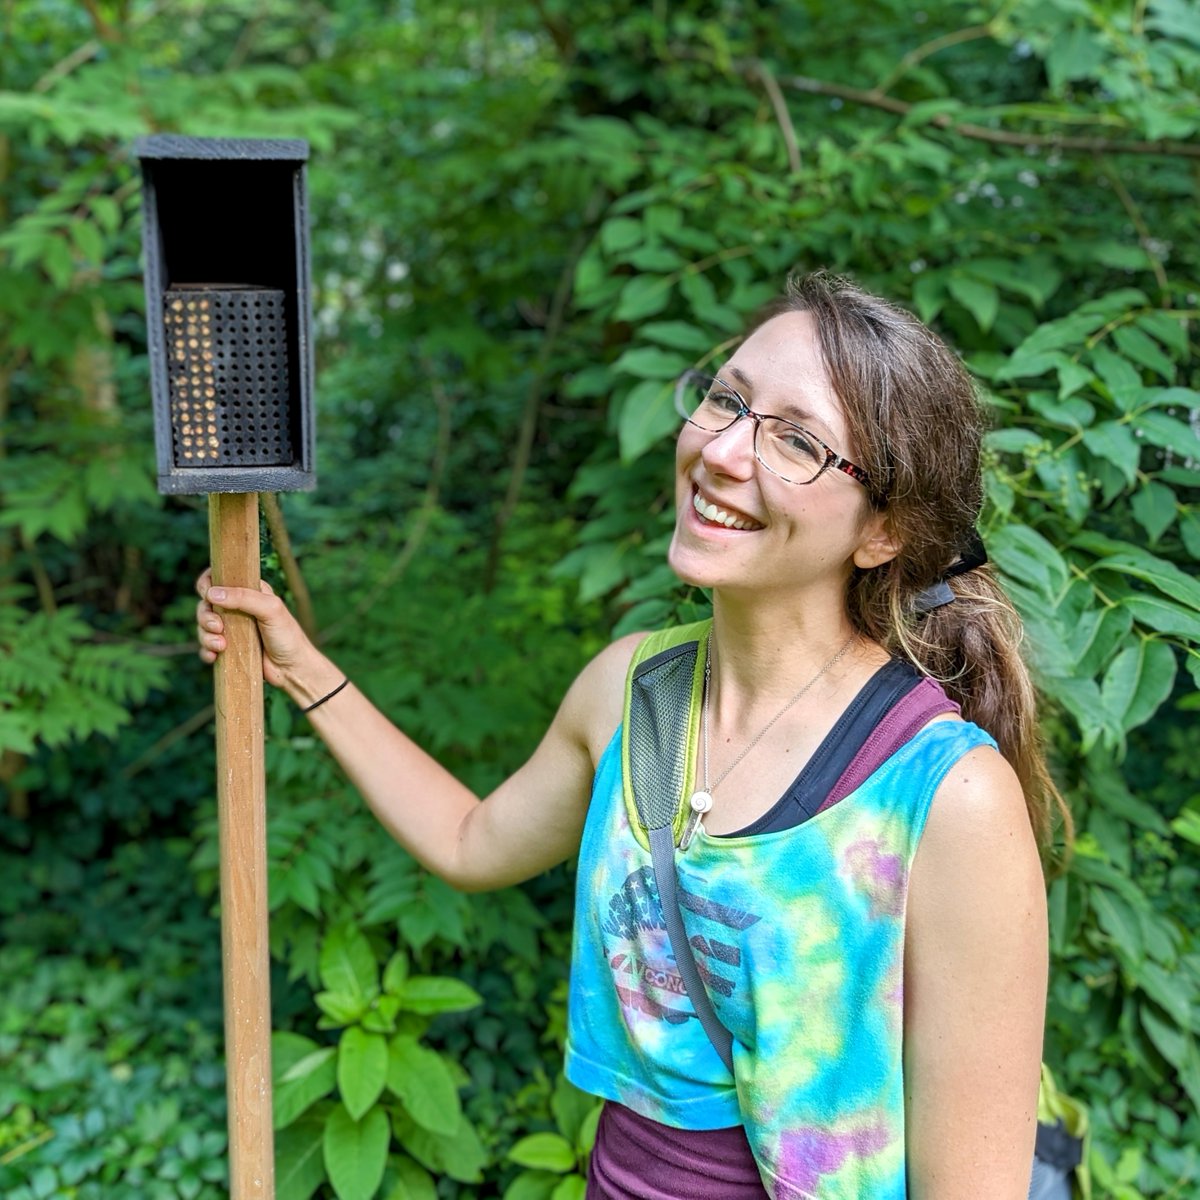 Meet Nico Boutiette, who works with our Earth Center! Nico has just placed a box of native leafcutter bee eggs to hatch with the warm weather. Leafcutter bees are important local pollinators that help plants and flowers reproduce! 🐝💚 #RollingRidgeMA #LeafcutterBees #Pollinators